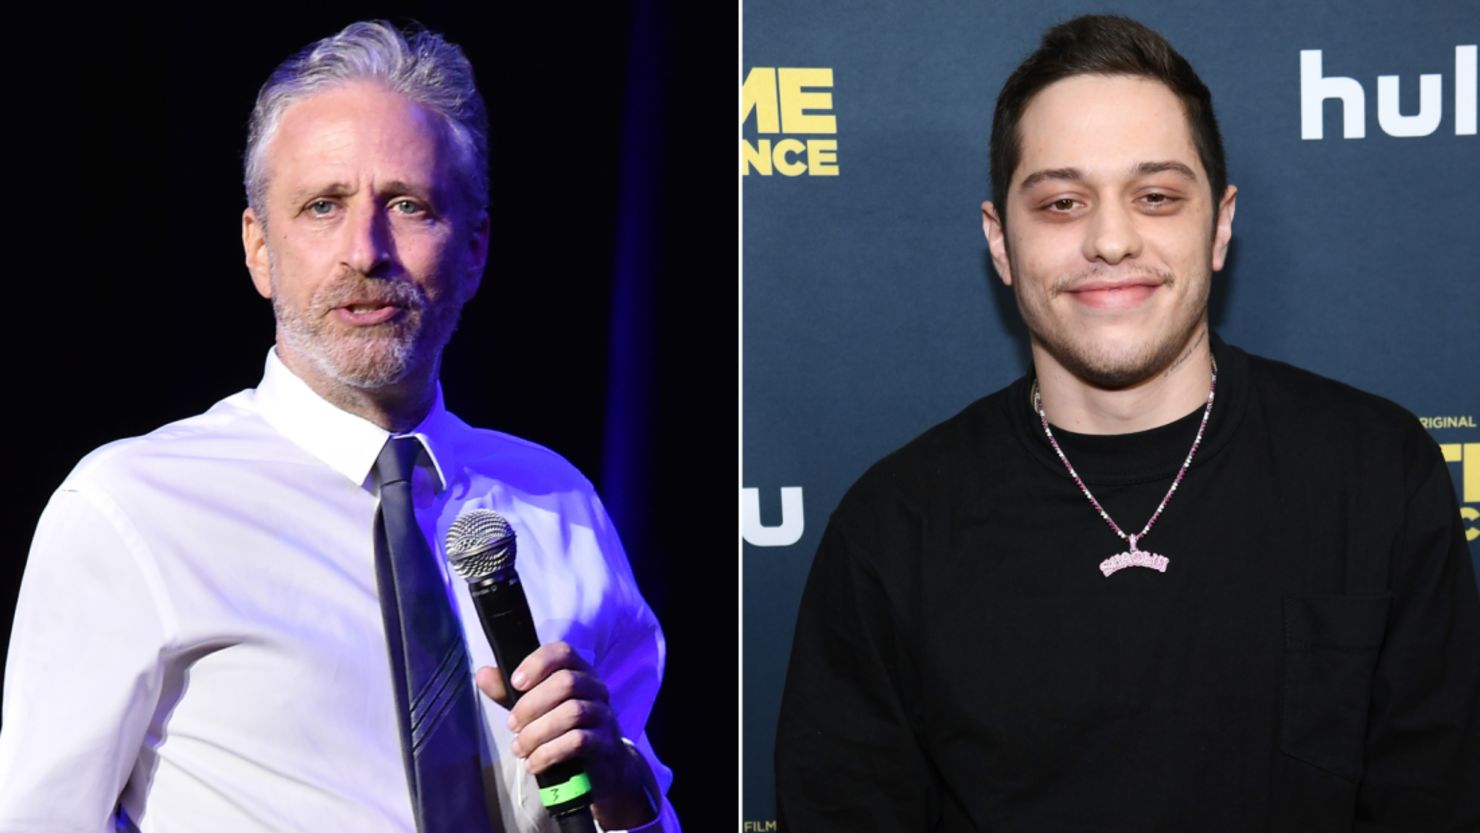 The event is the brainchild of Jon Stewart and Pete Davidson. 